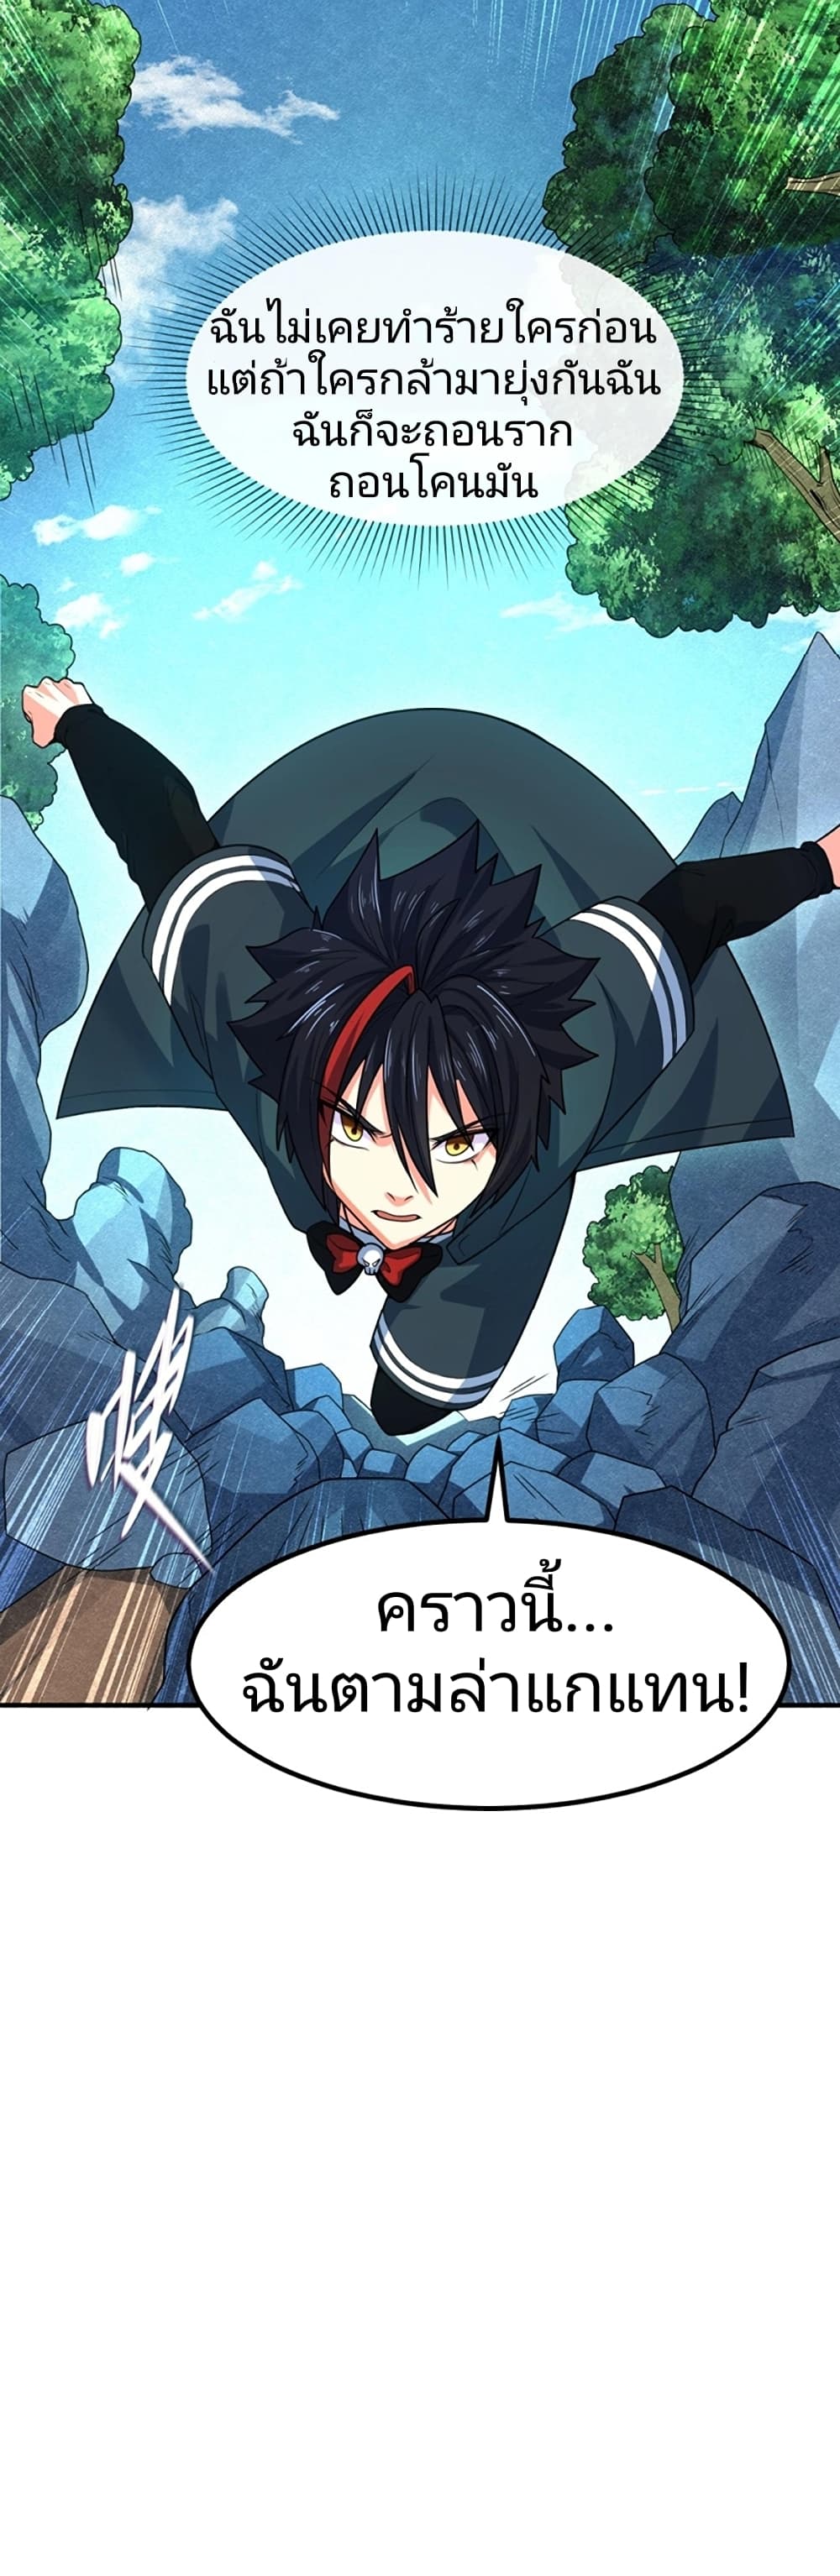 The Age of Ghost Spirits à¸à¸­à¸à¸à¸µà¹ 9 (50)